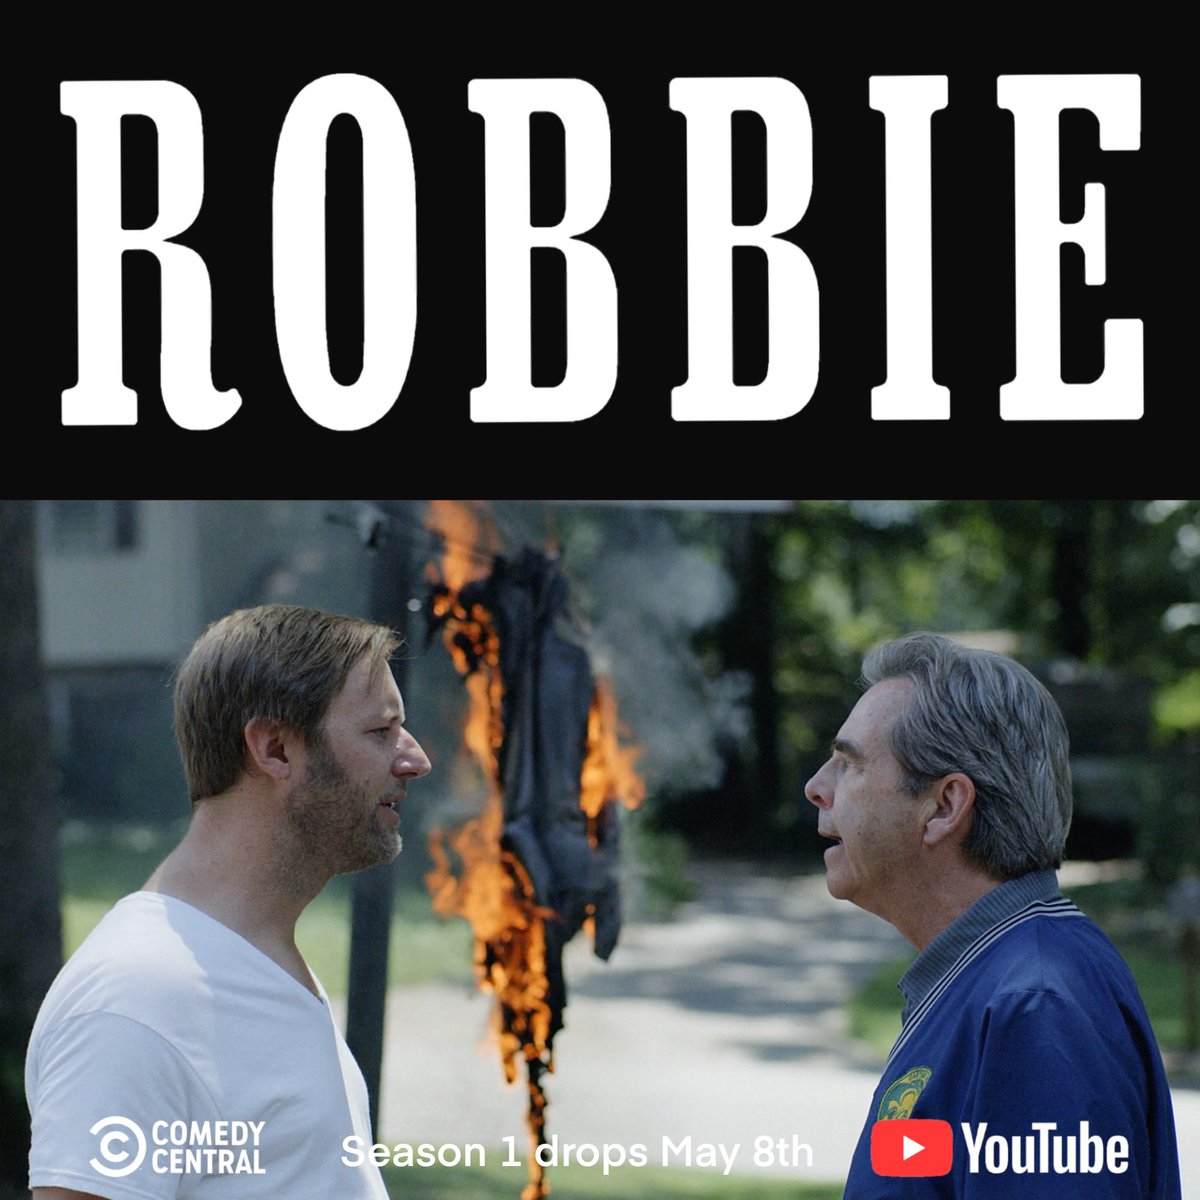 Please join us Thursday night when ROBBIE premieres on Comedy Central and then the entire season becomes available right after on YouTube. #RoryScovel